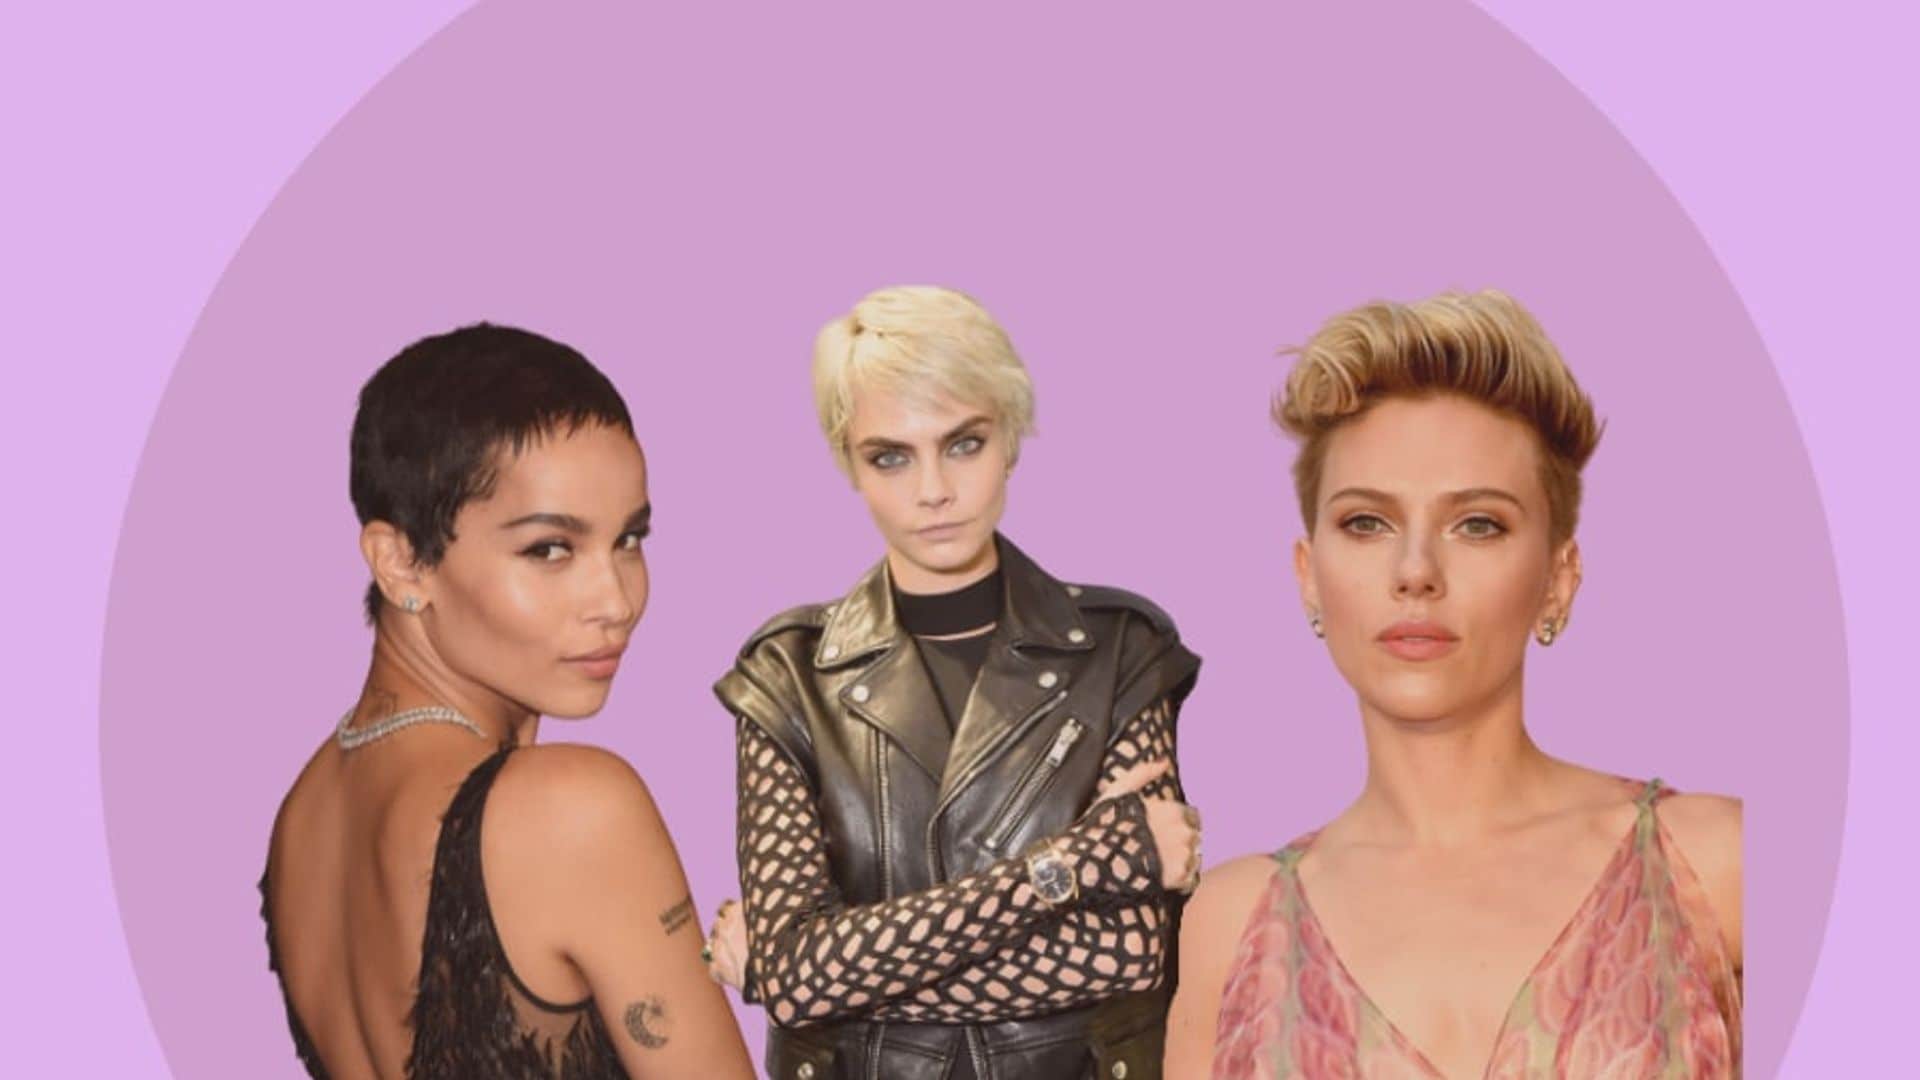 Here’s which pixie cut you should get according to your face shape